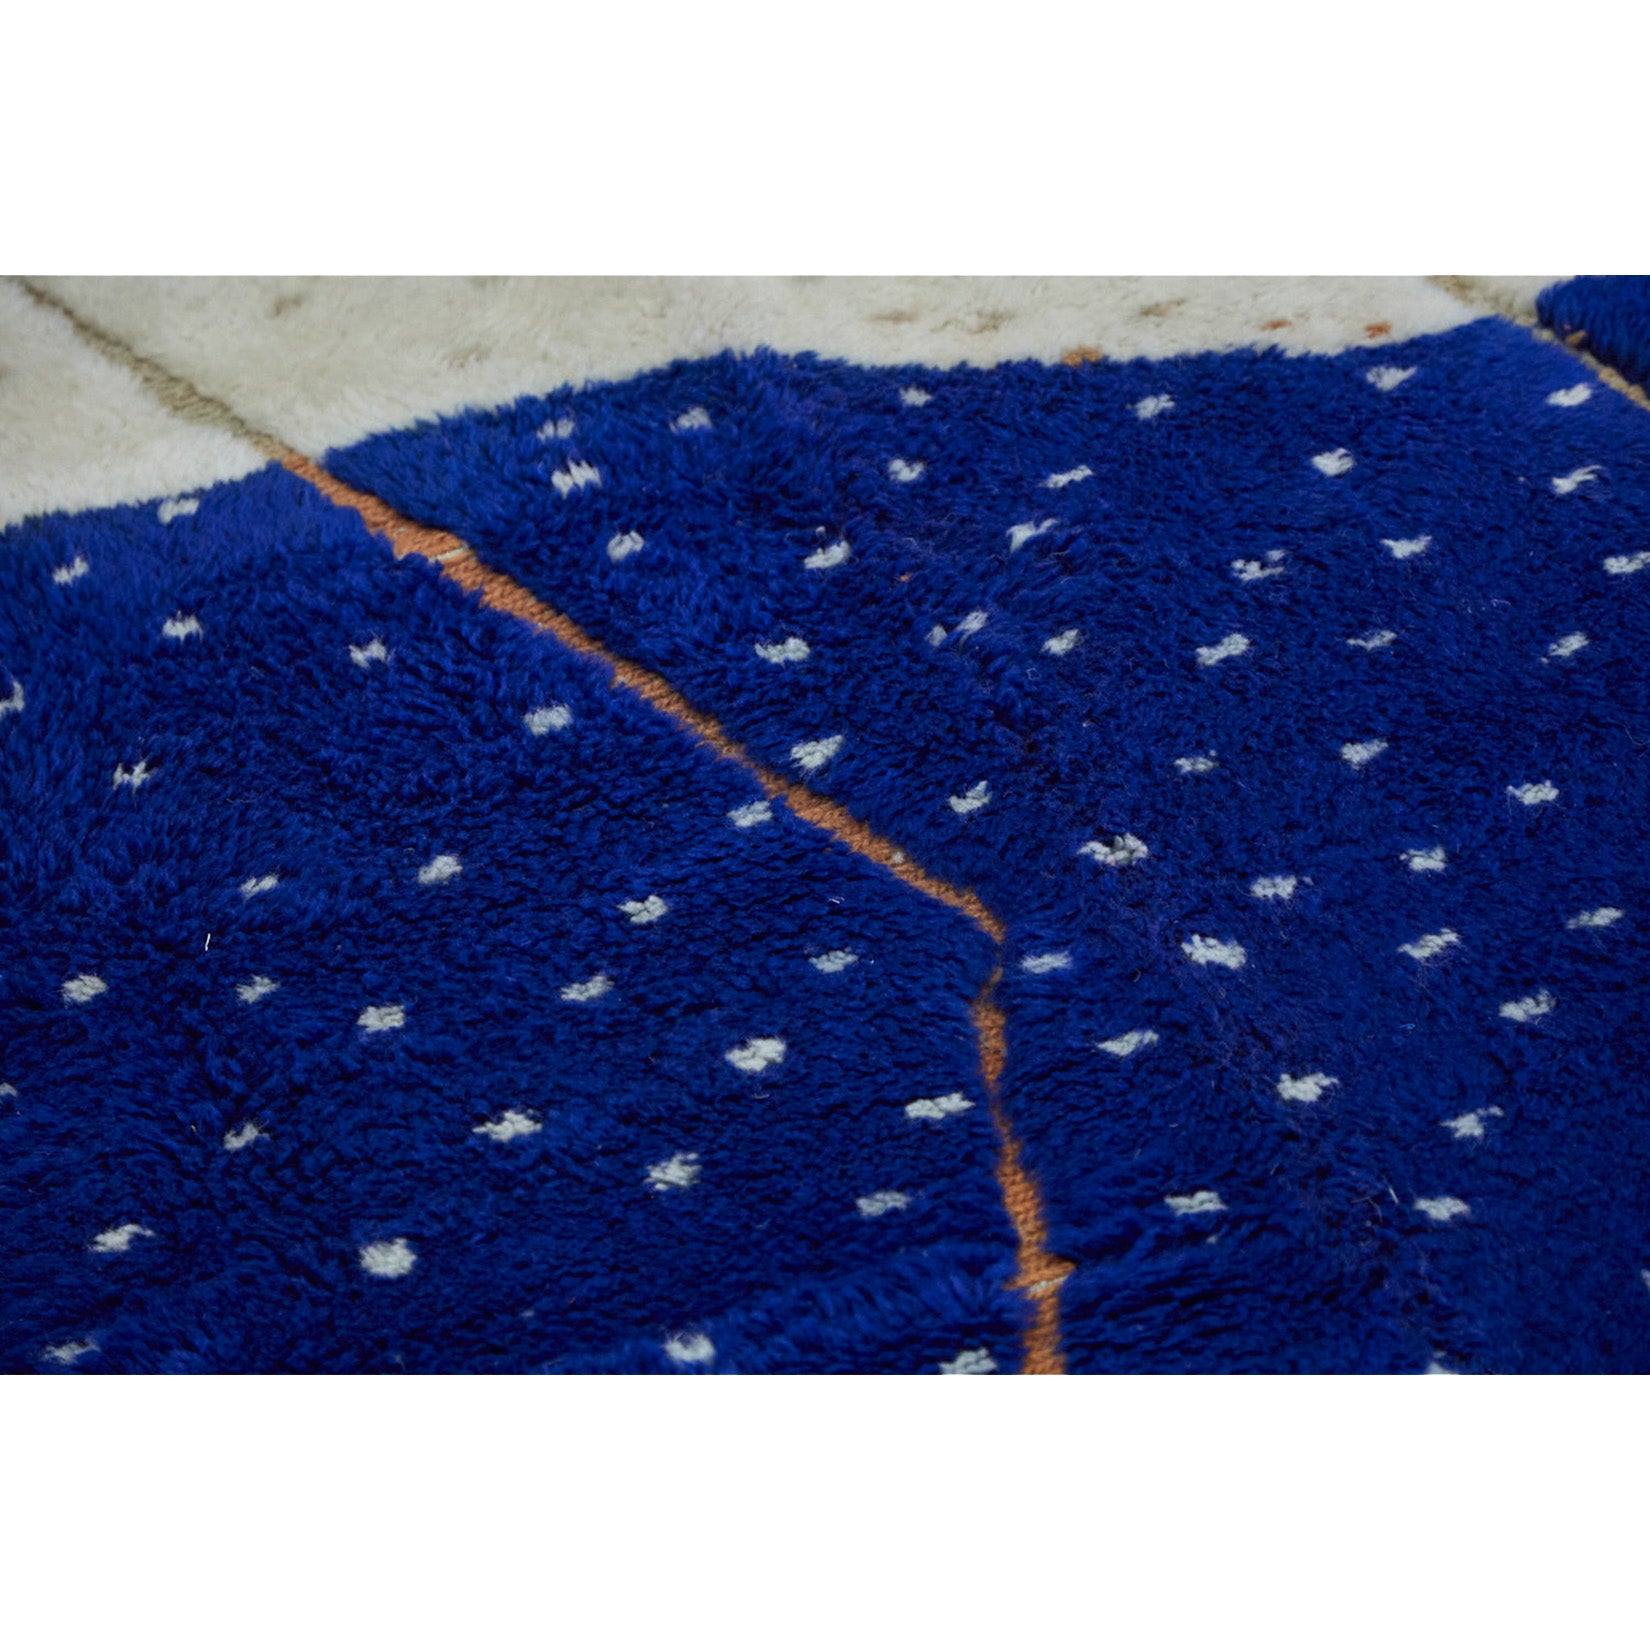 Colorful Moroccan bedroom rug in blue, white, and orange - Kantara | Moroccan Rugs